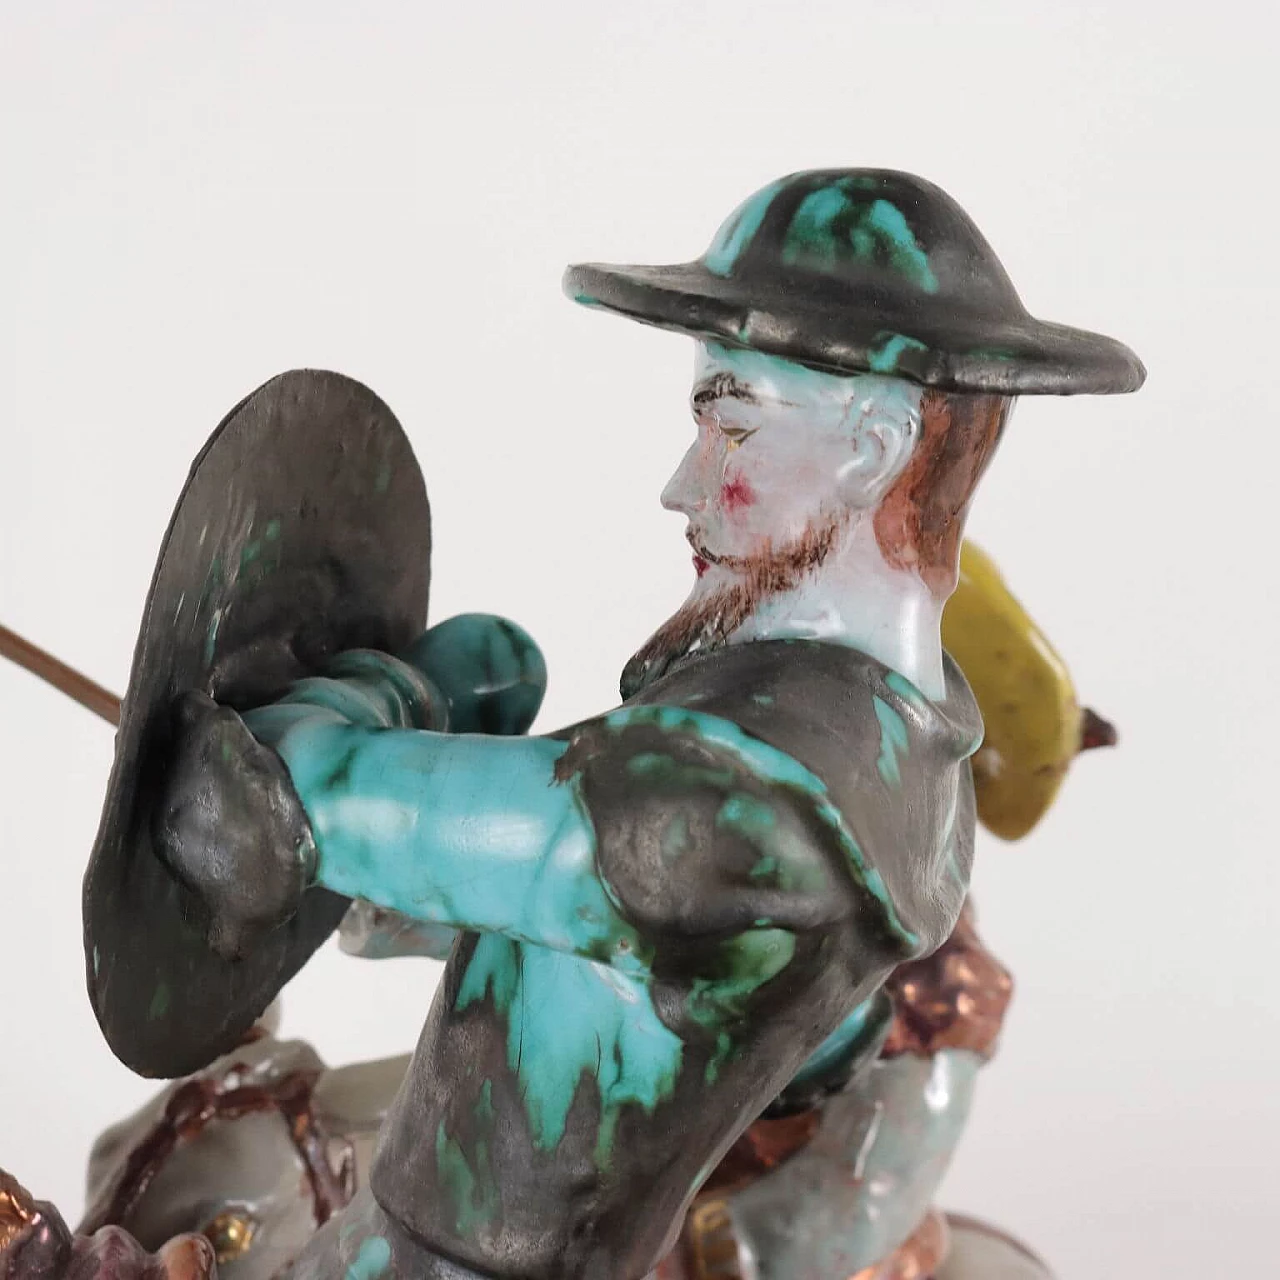 Glazed terracotta Don Quixote and Sancho Panza sculpture by Trevir 19